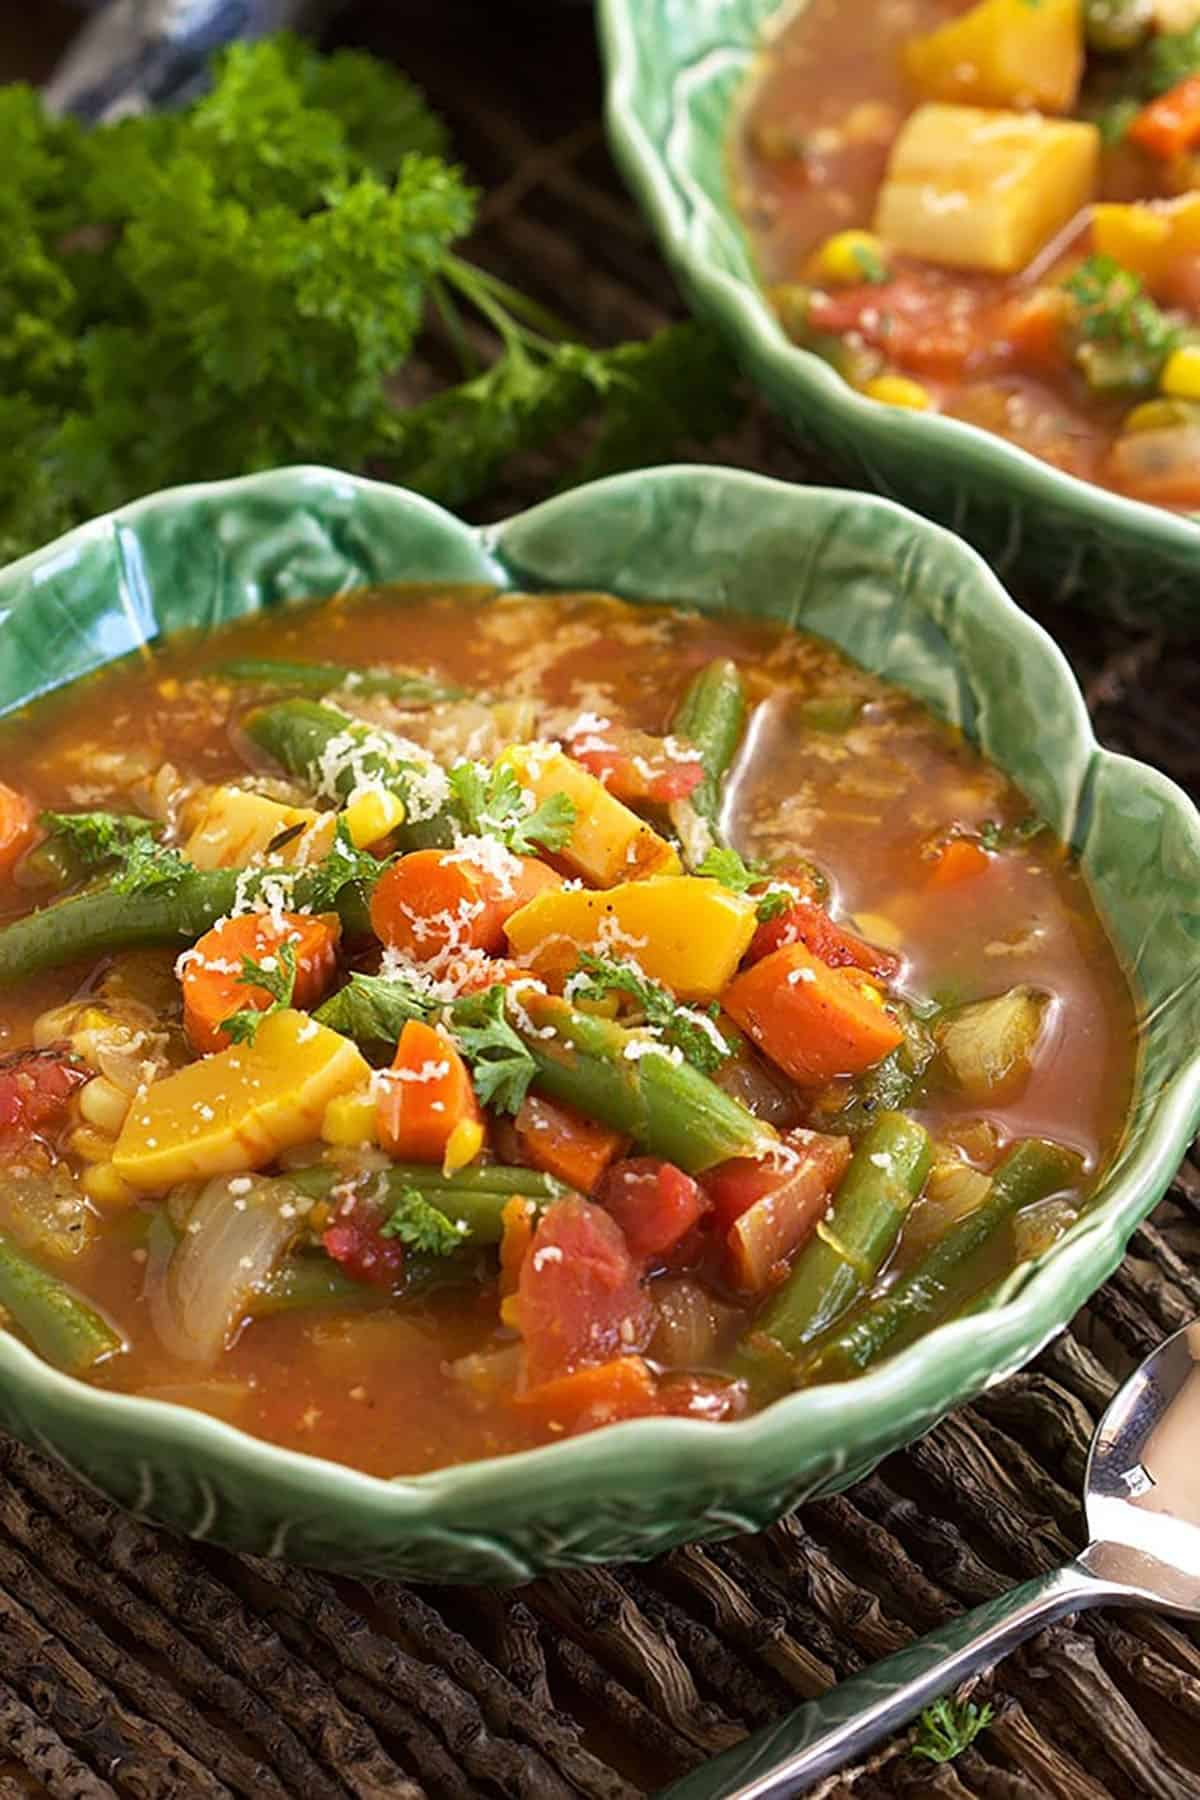 Veggies are piled high in a rich brown broth. 